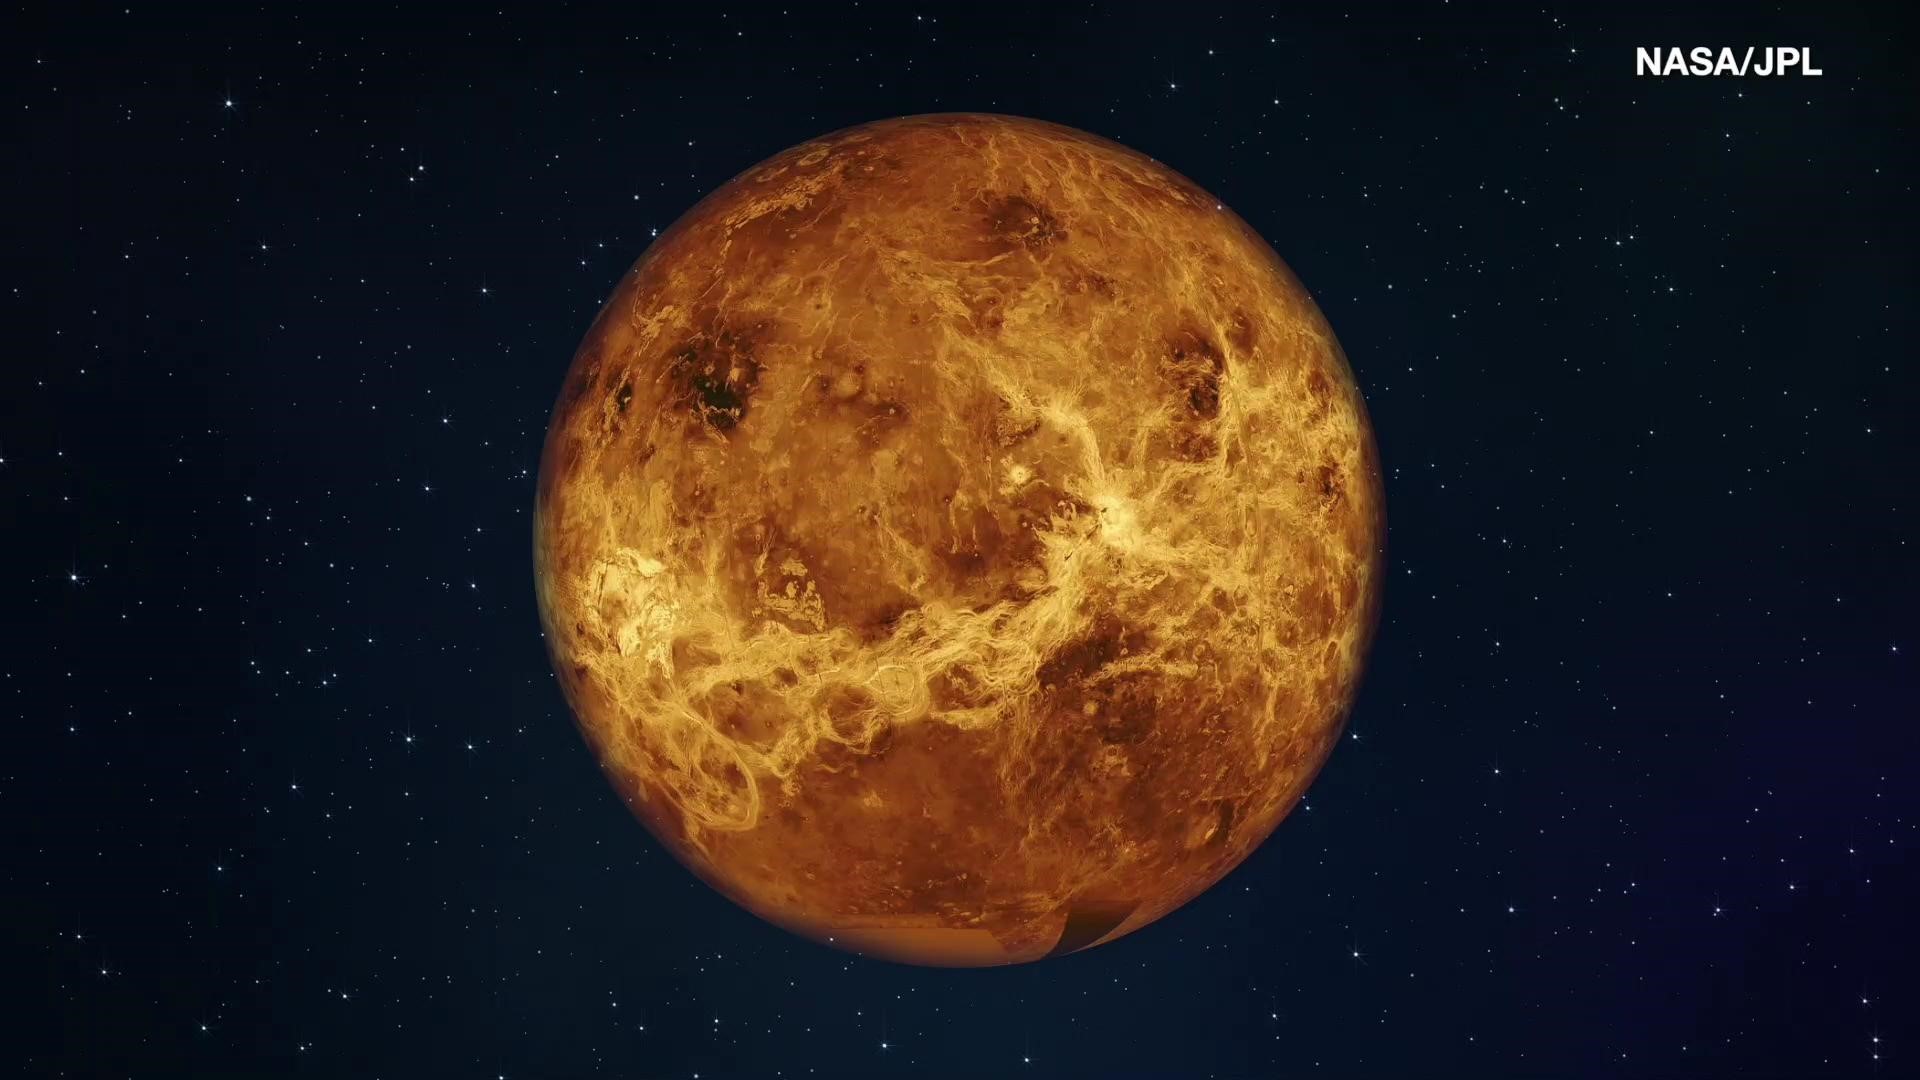 The European Space Agency is thinking about taking a trip to Venus. Josh King reports.